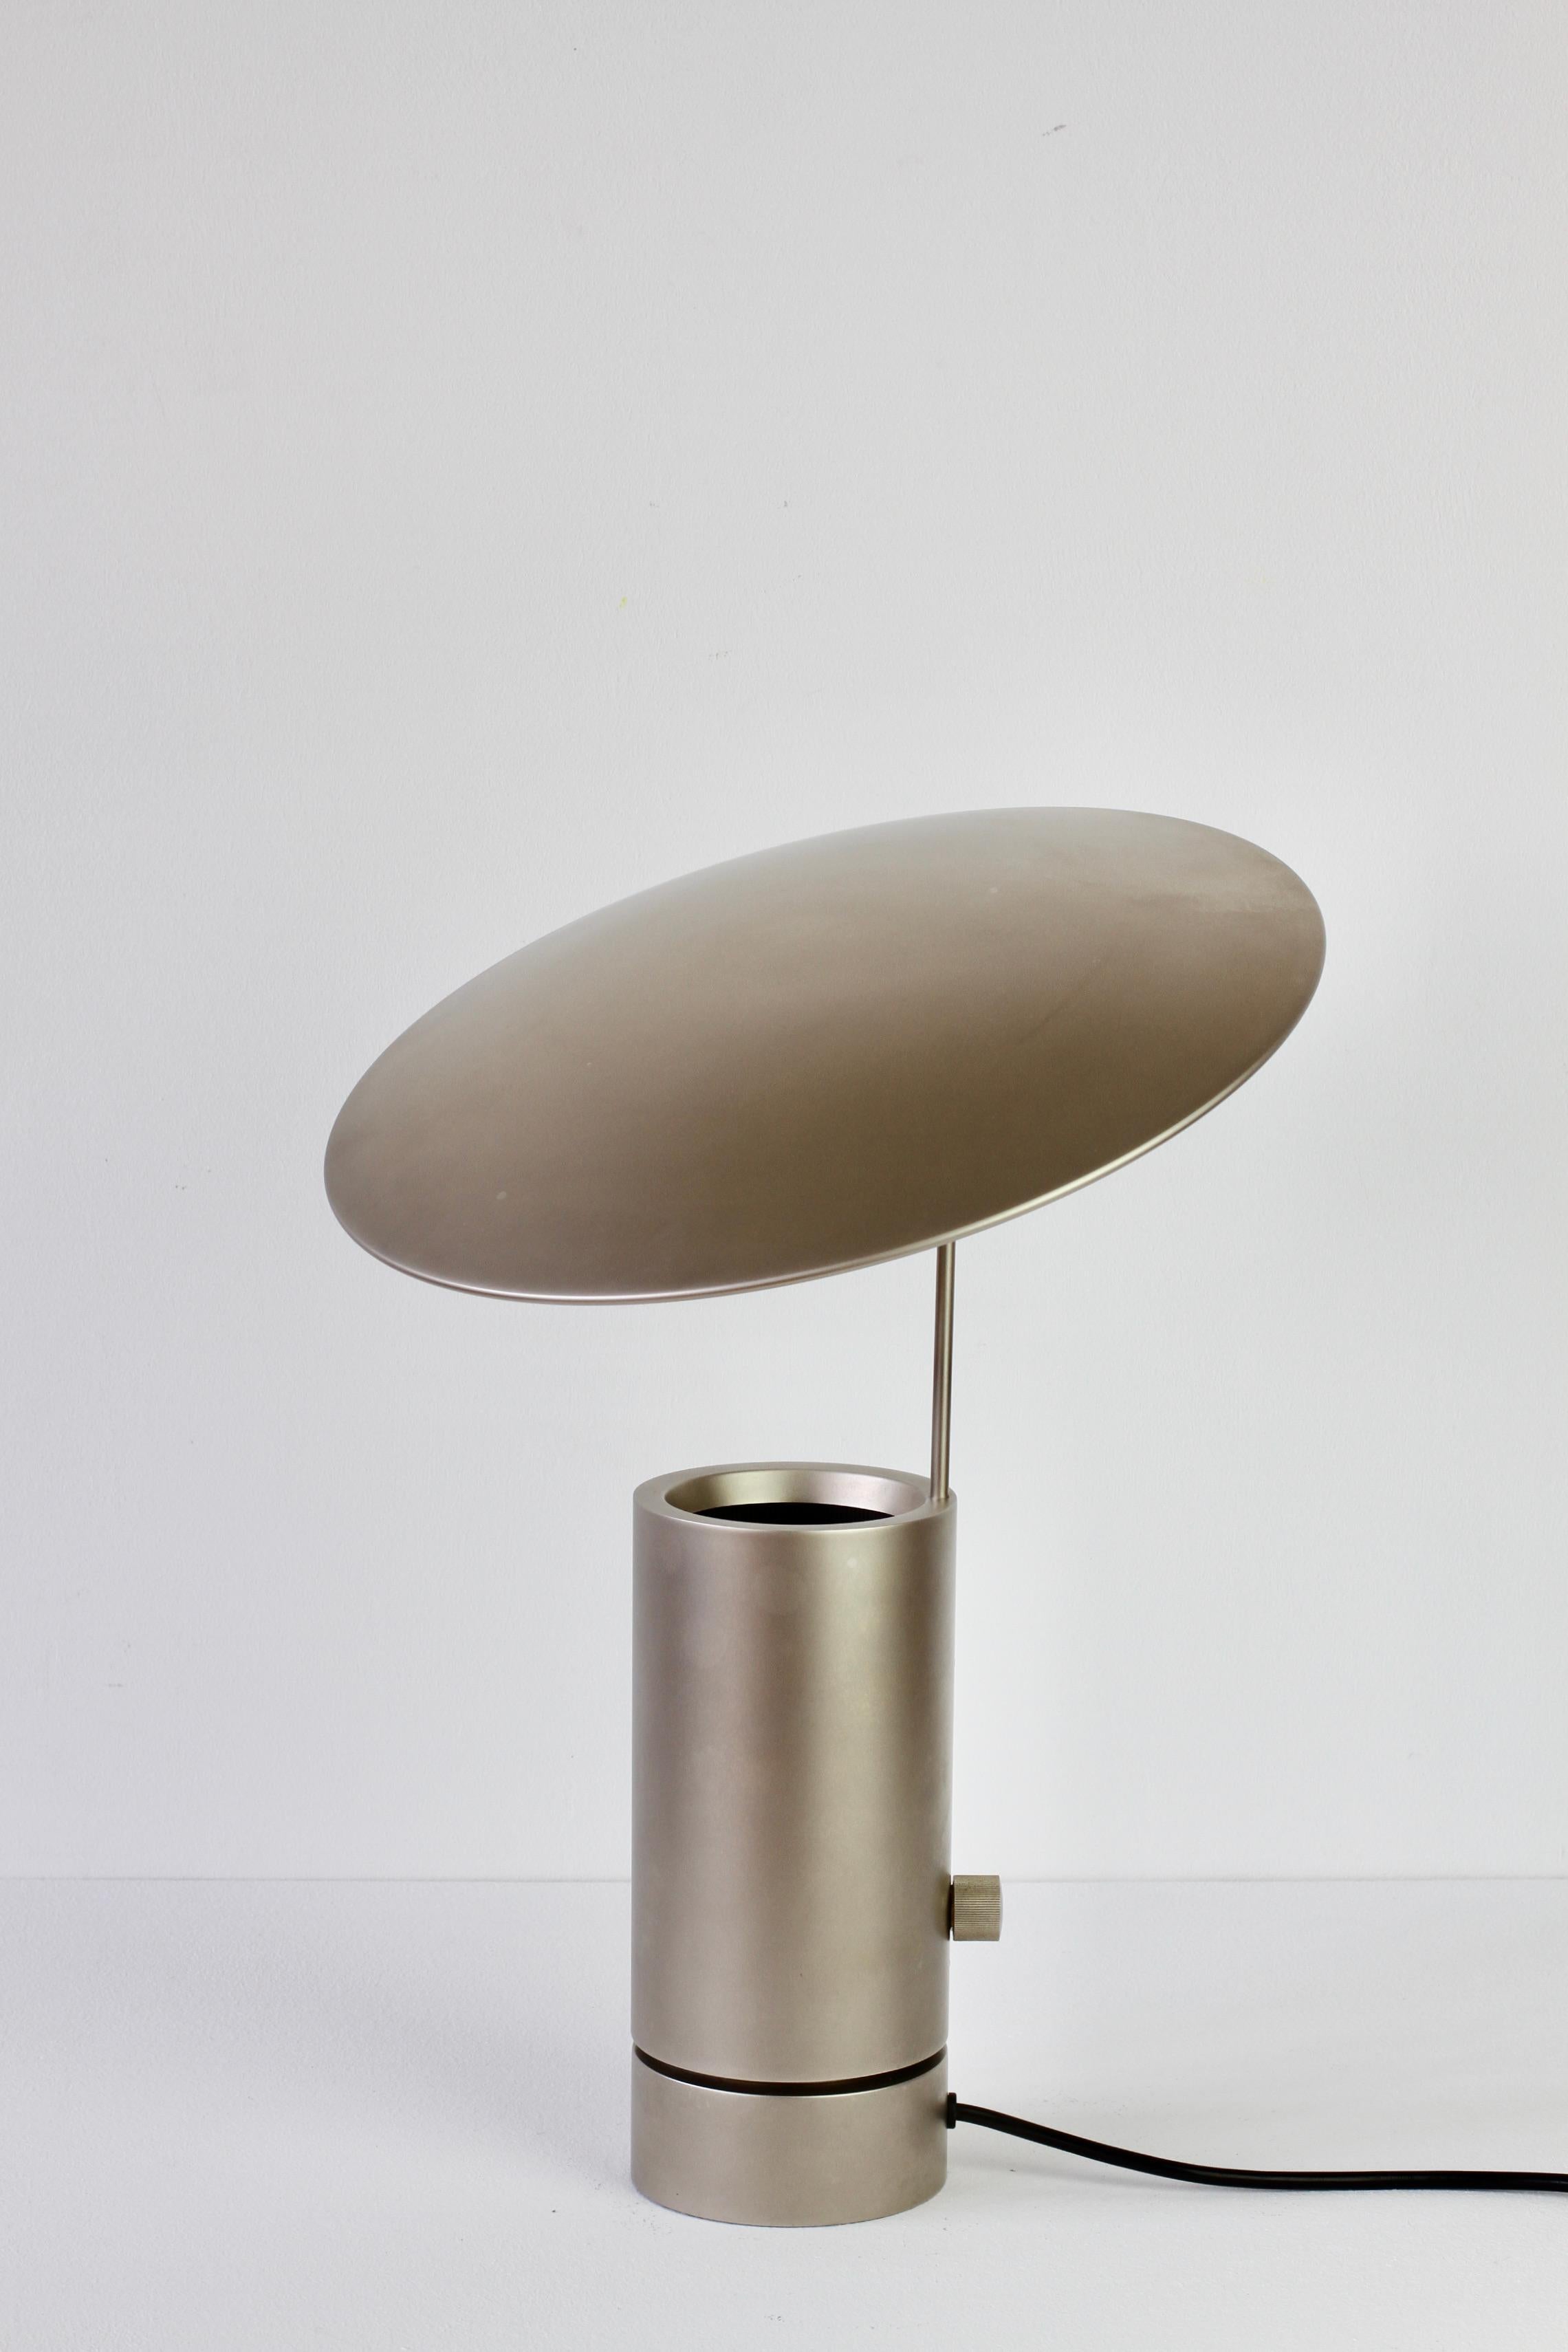 Florian Schulz Rare 'TOS' Vintage Modernist Brushed Satin Nickel Table Lamp In Good Condition For Sale In Landau an der Isar, Bayern